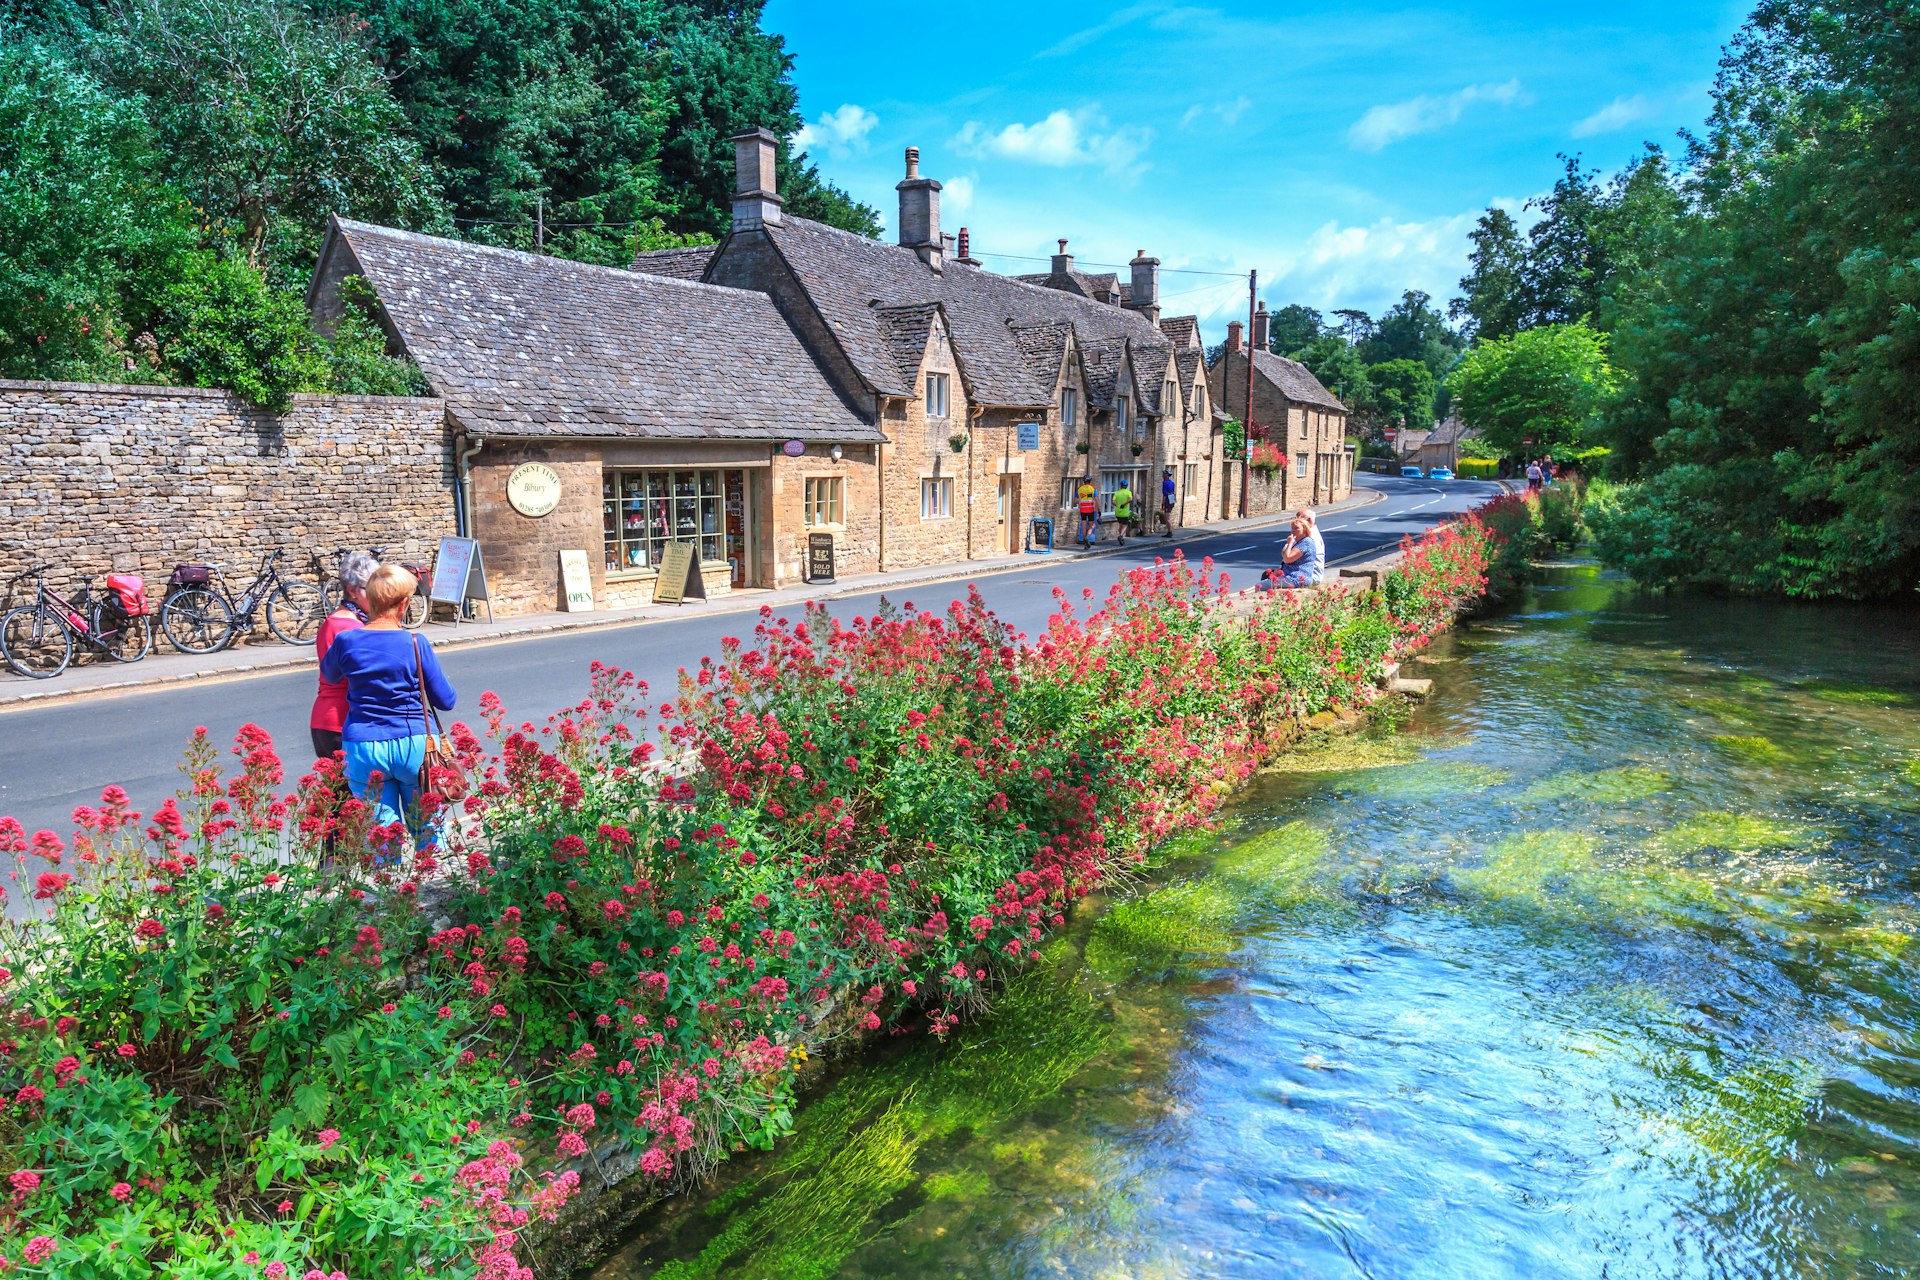 Arlington Row traditional Cotswold stone cottages in Gloucestershire on JULY 9, 2014, England. Bibury it the most depicted village in the world.